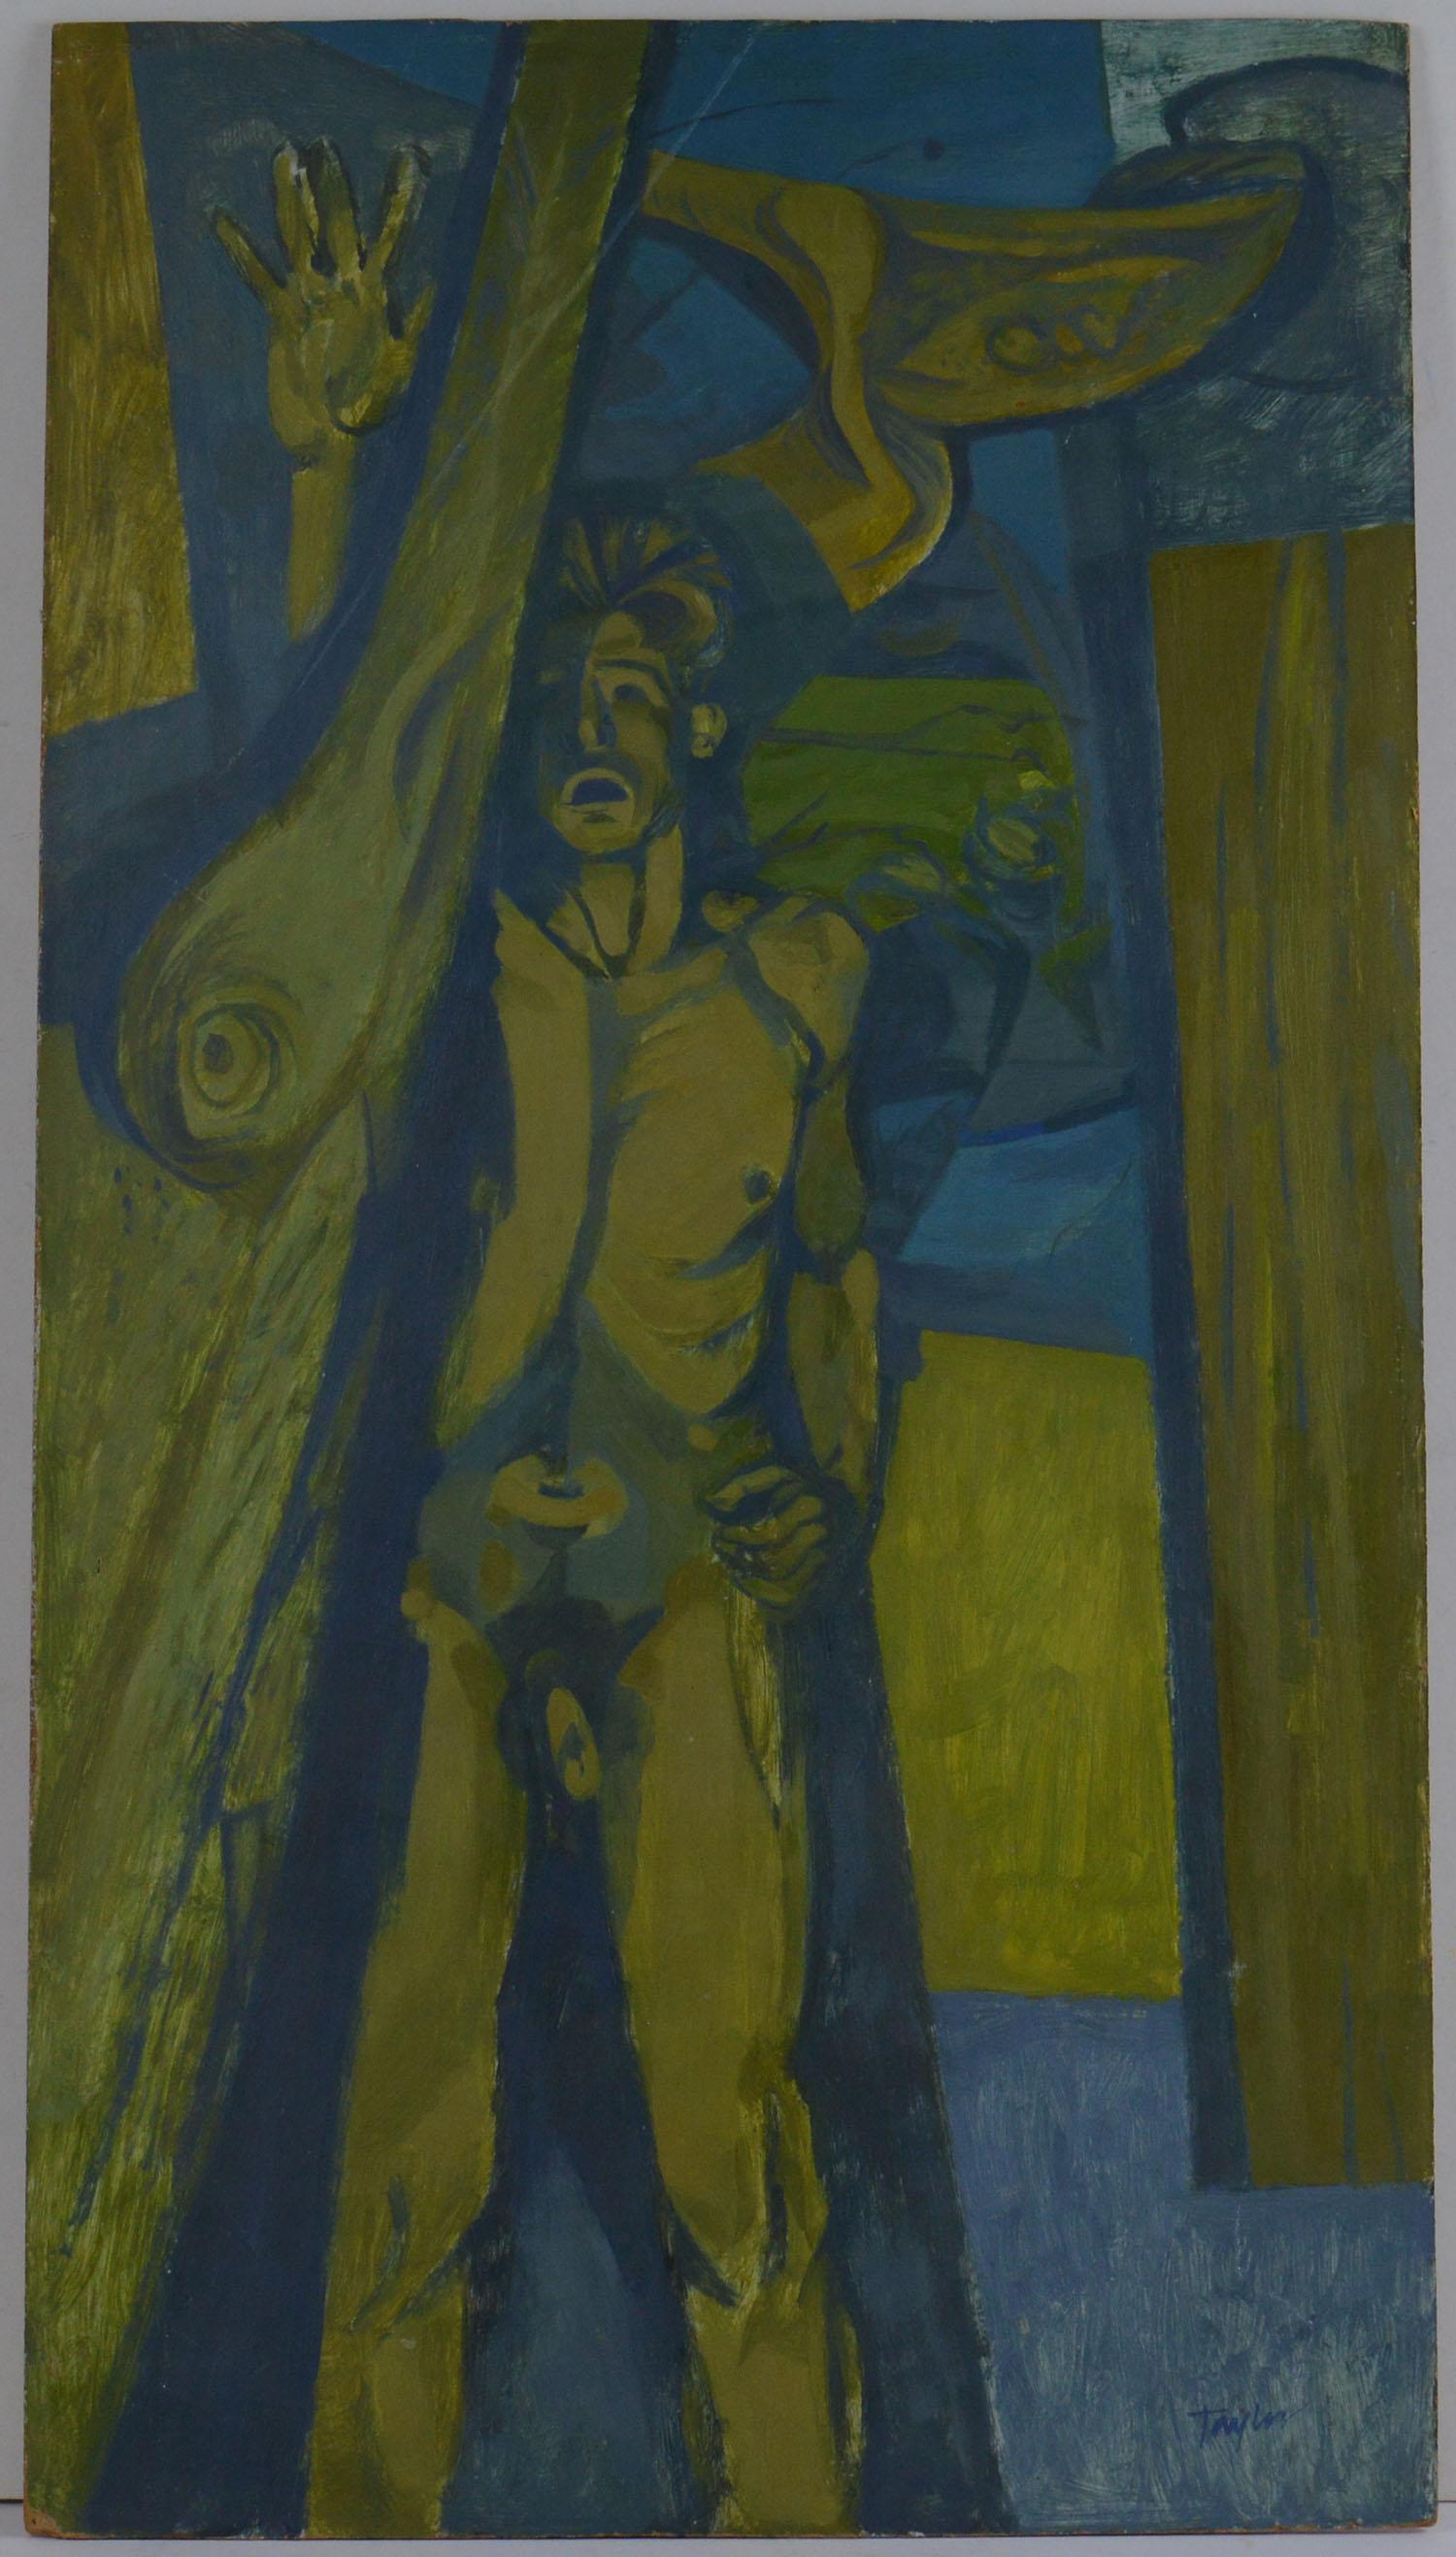 Painted Stylized Male Nude by A. C Taylor, 1950s